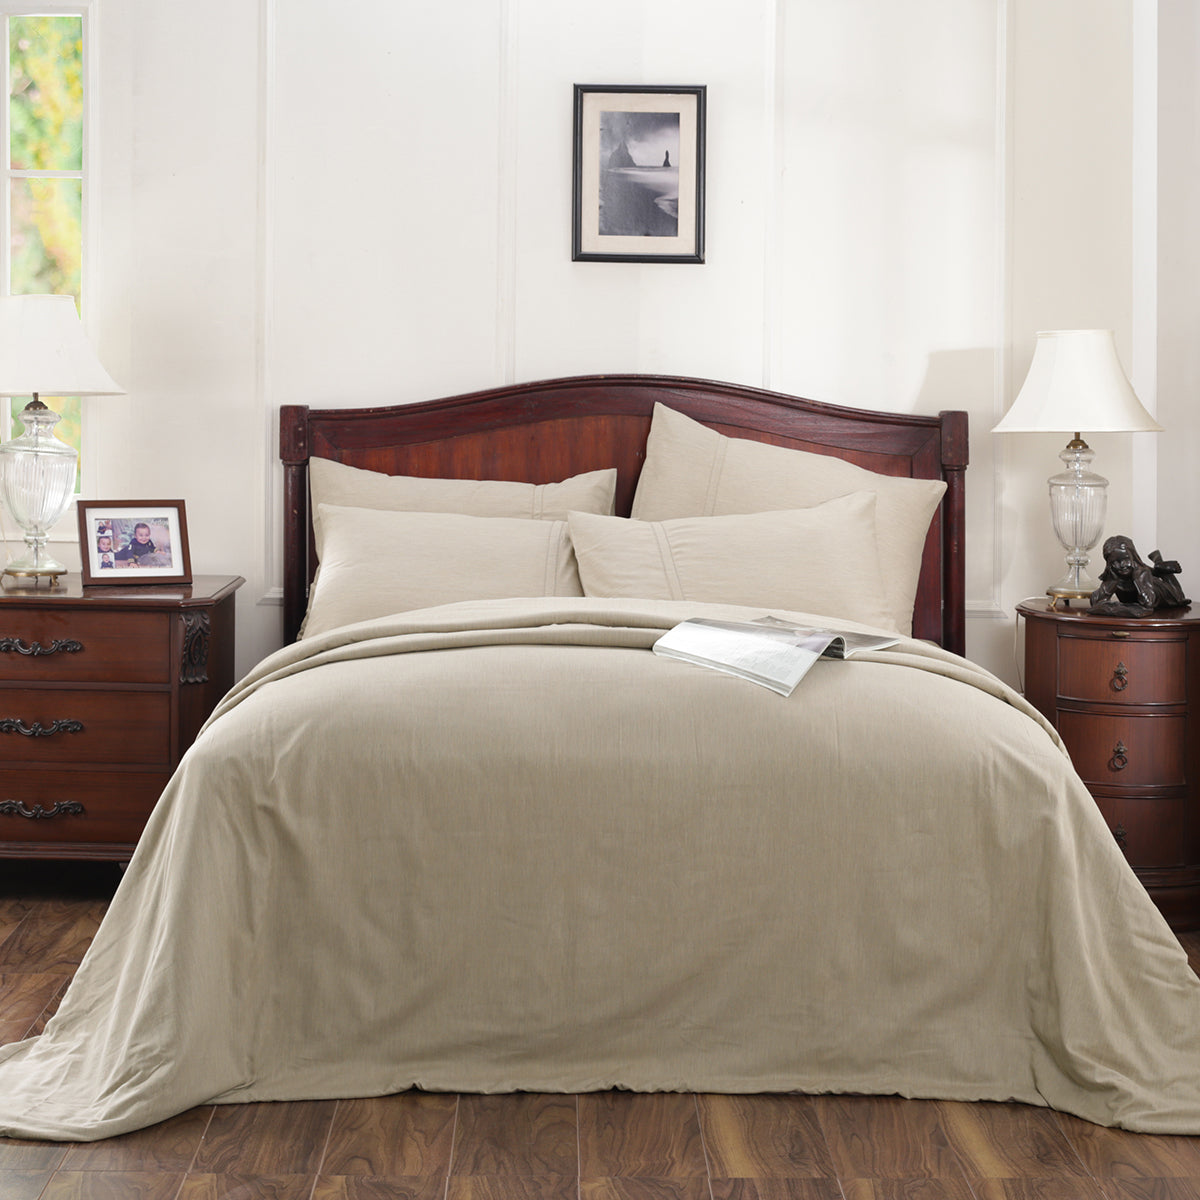 Emmie Reversible Made With Egyptian Cotton Ultra Soft Light Beige Duvet Cover with Pillow Case